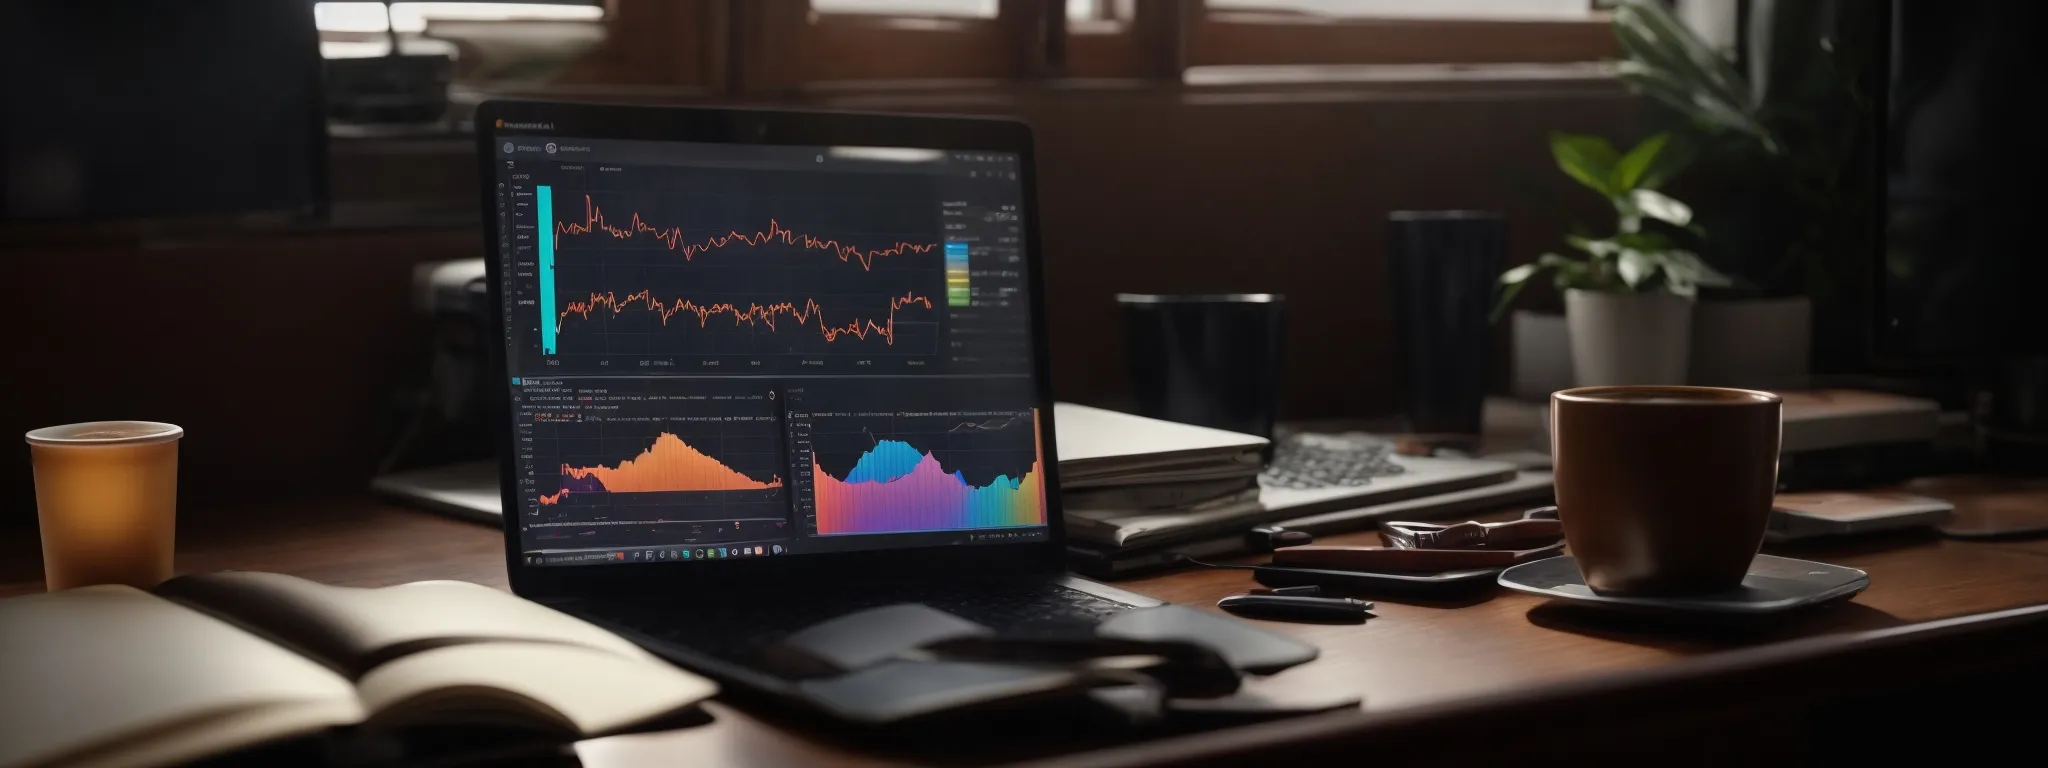 an open laptop displaying colorful graphs on its screen sits on a desk next to a notebook and a cup of coffee.